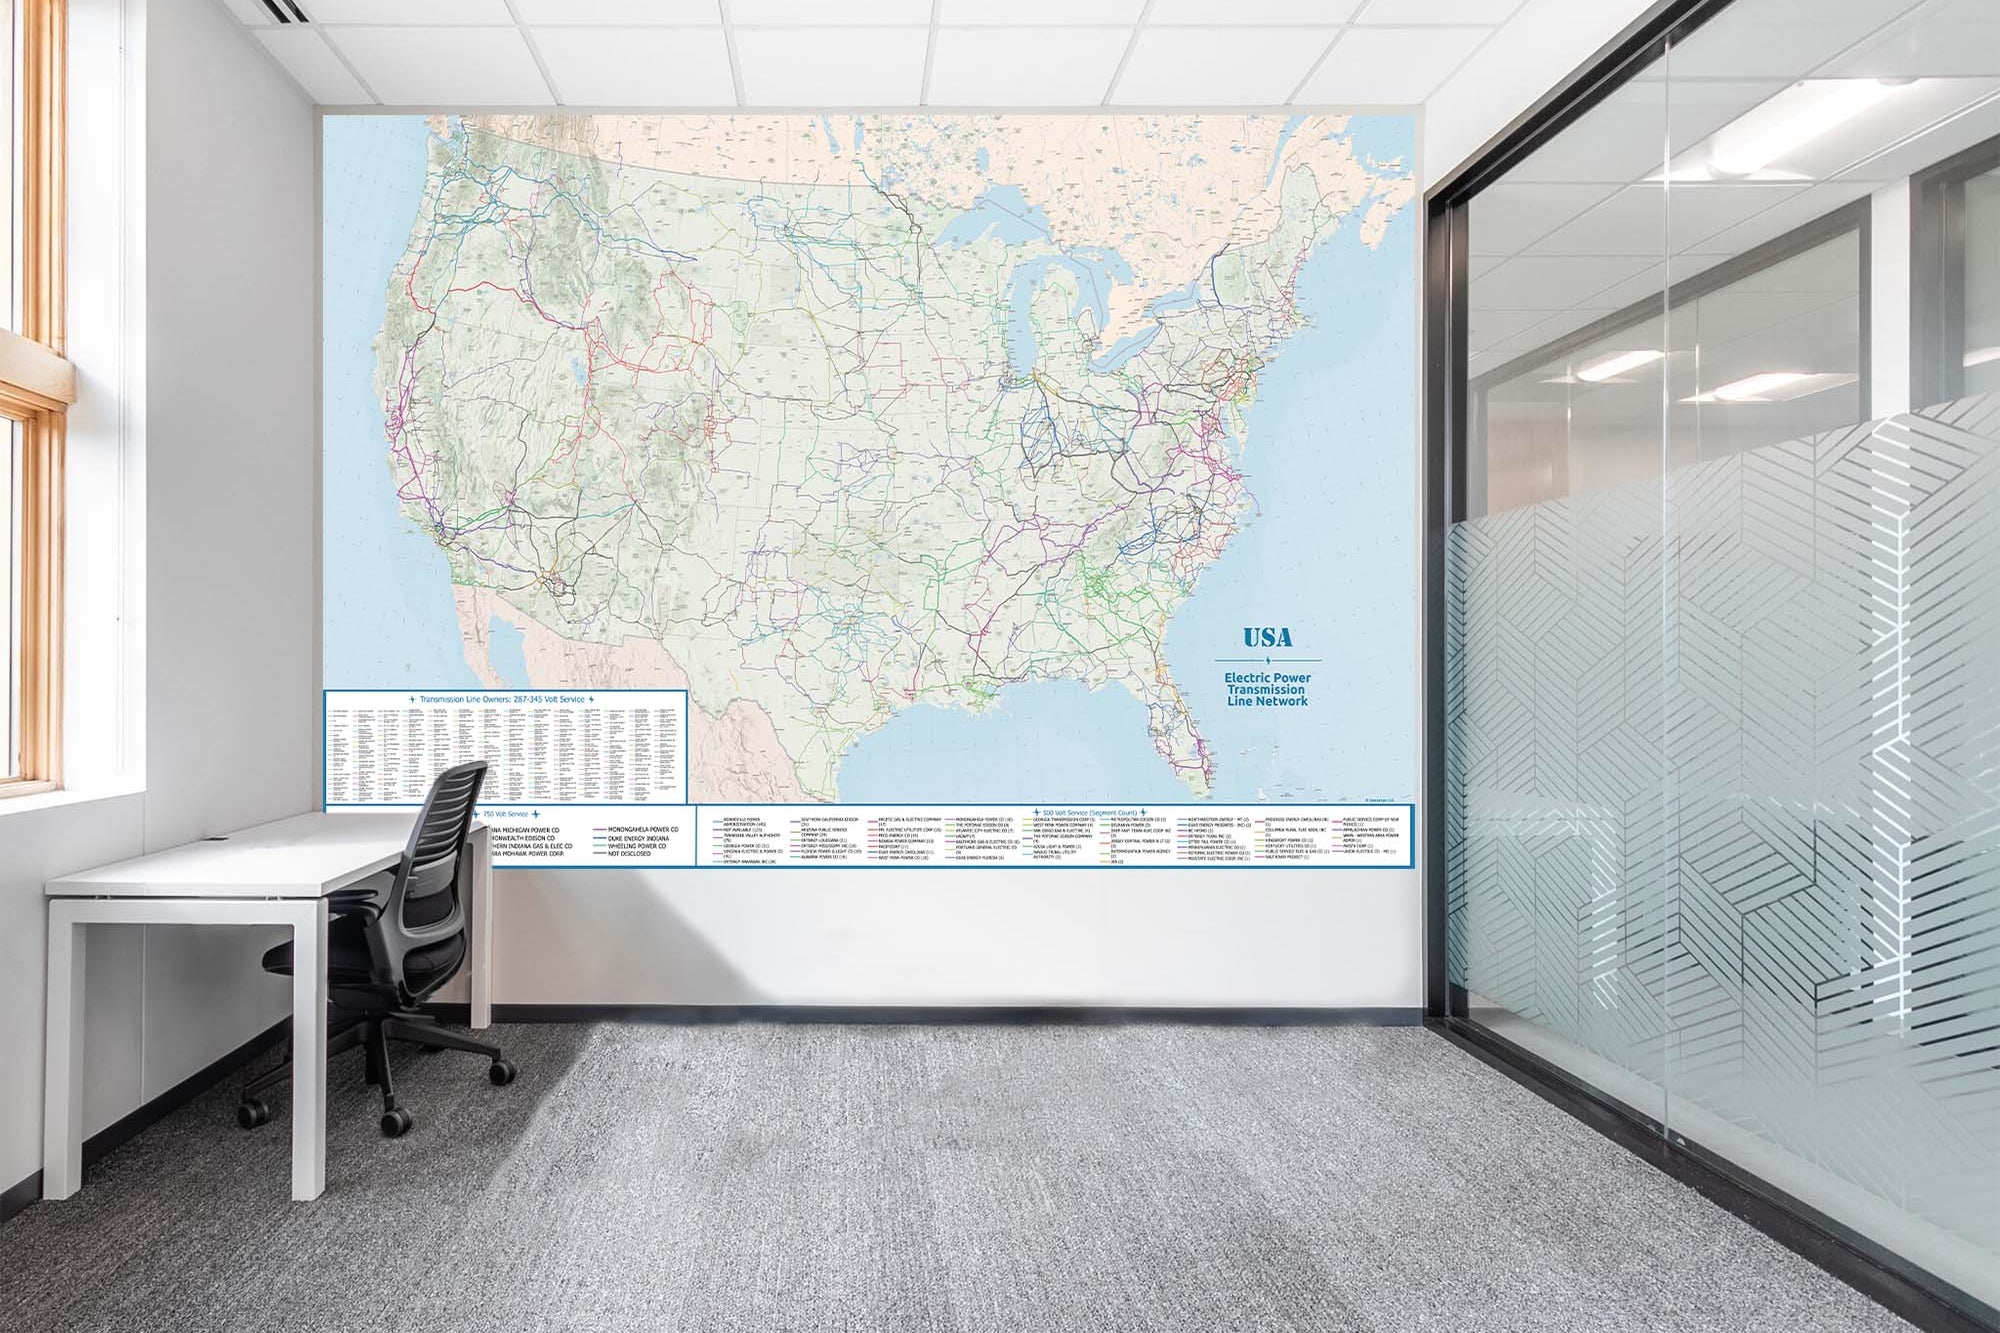 US Power Grid Map - Electric Power Transmission Grid Map - Large Wall Map in office